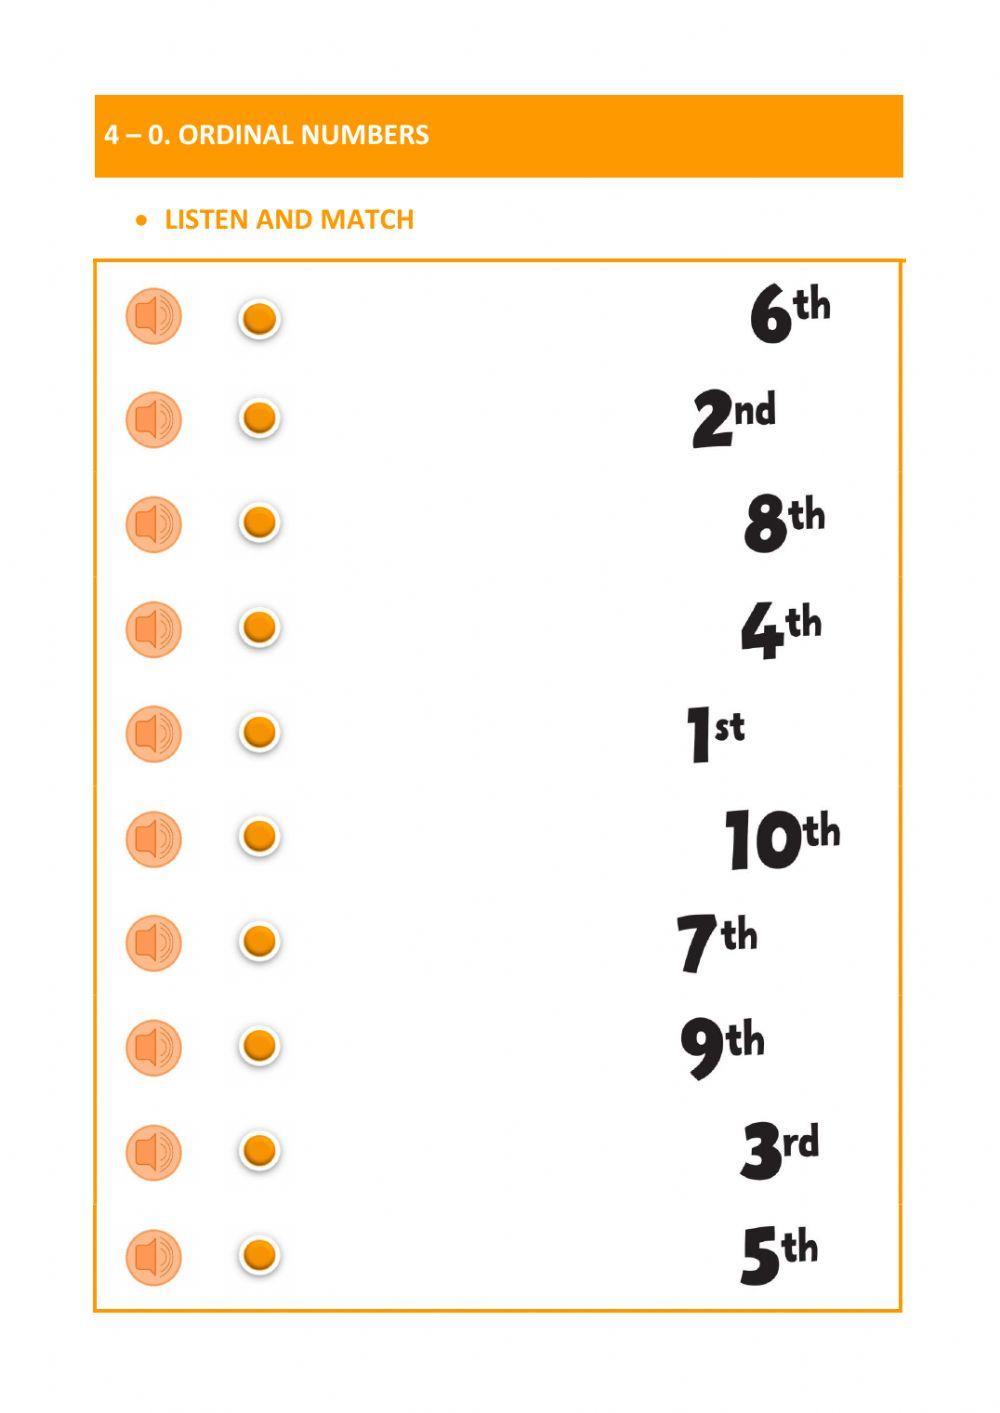 4-0. ORDINAL NUMBERS. LISTEN, READ AND MATCH